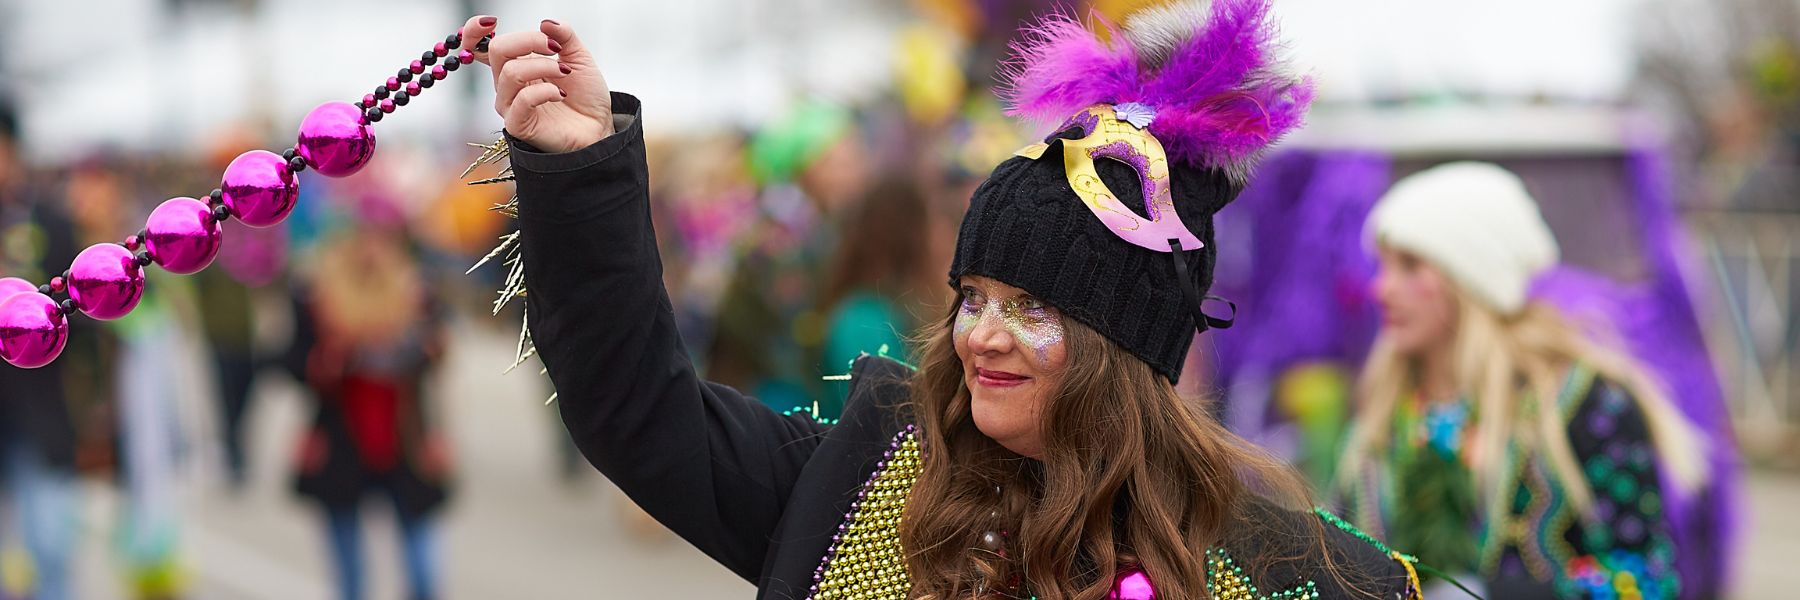 A woman throws beads during Mardi Gras in St. Louis.